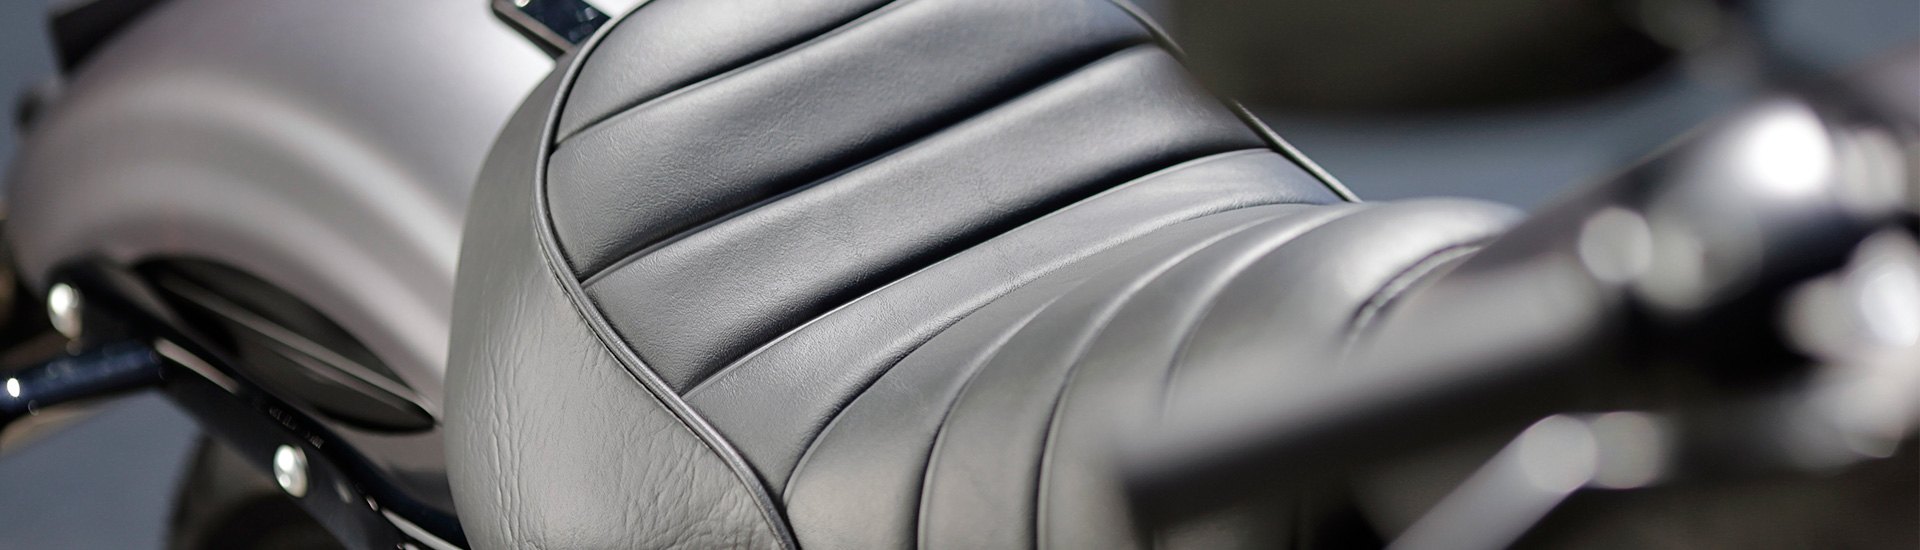 Motorcycle Seats & Seat Covers